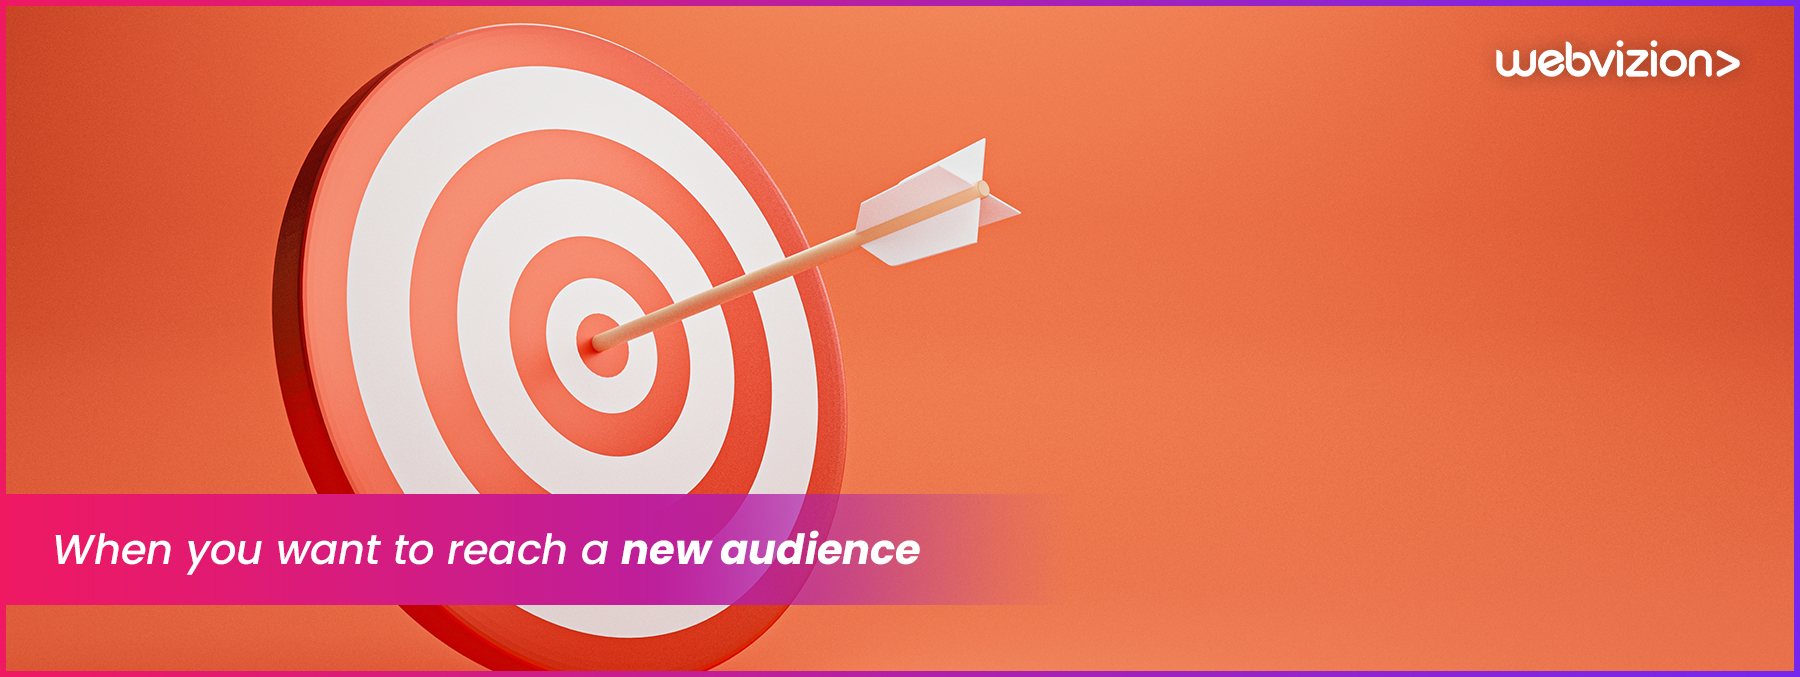 When-you-want-to-reach-a-new-audience-Webvizion-Global